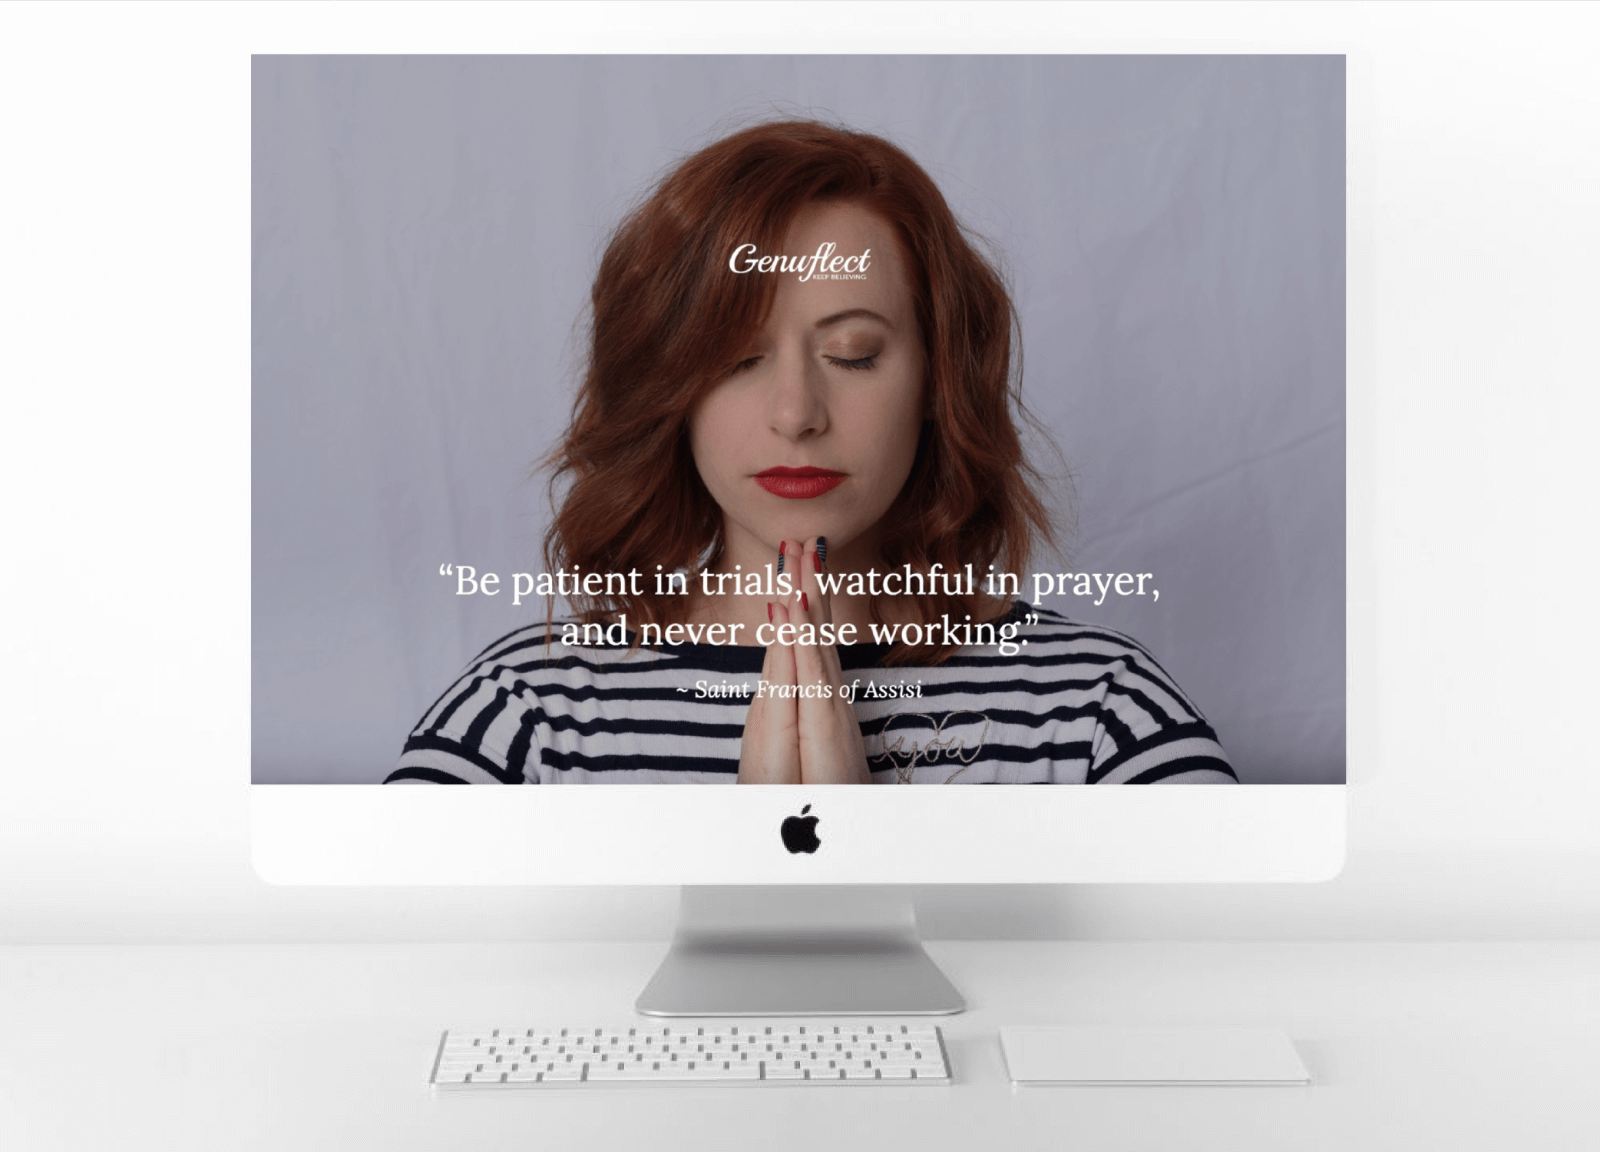 Genuflect computer background image of a Close up of a young woman with eyes closed and hands folded in prayer up near her chin